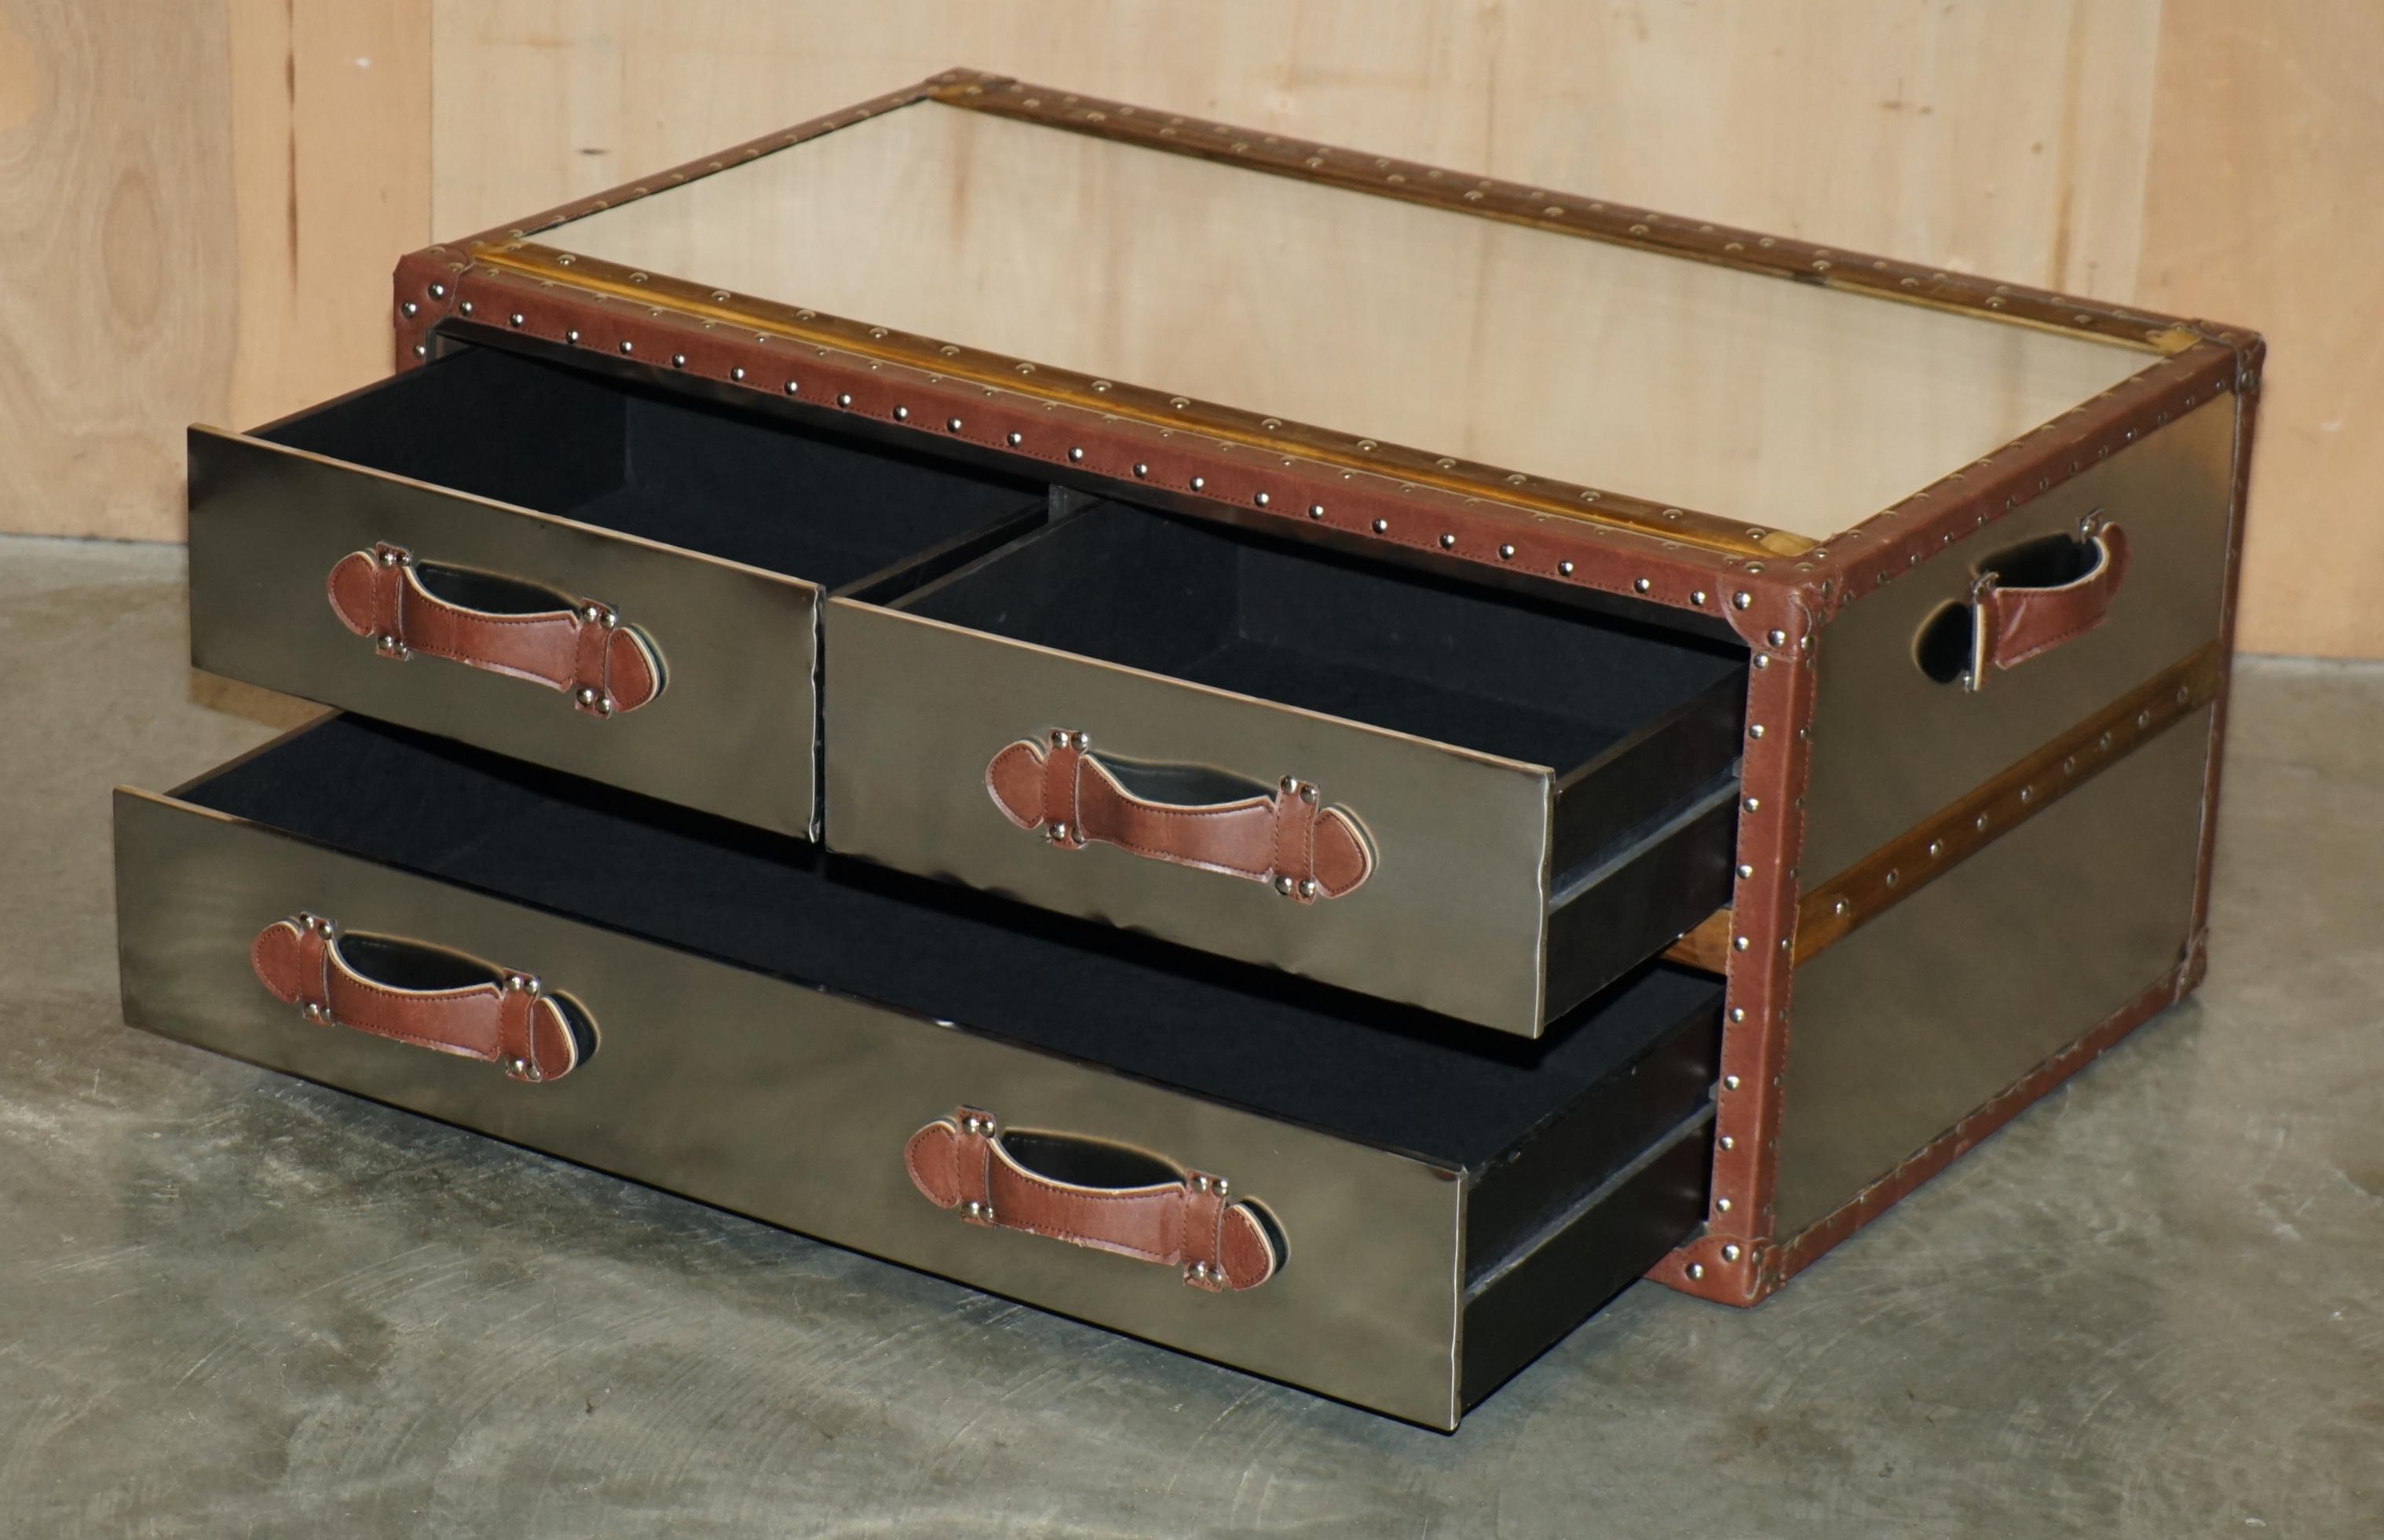 ViNTAGE HAND ALUMINIUM & BROWN LEATHER AVIATOR COFFEE TABLE STORAGE TRUNK CHEST For Sale 7